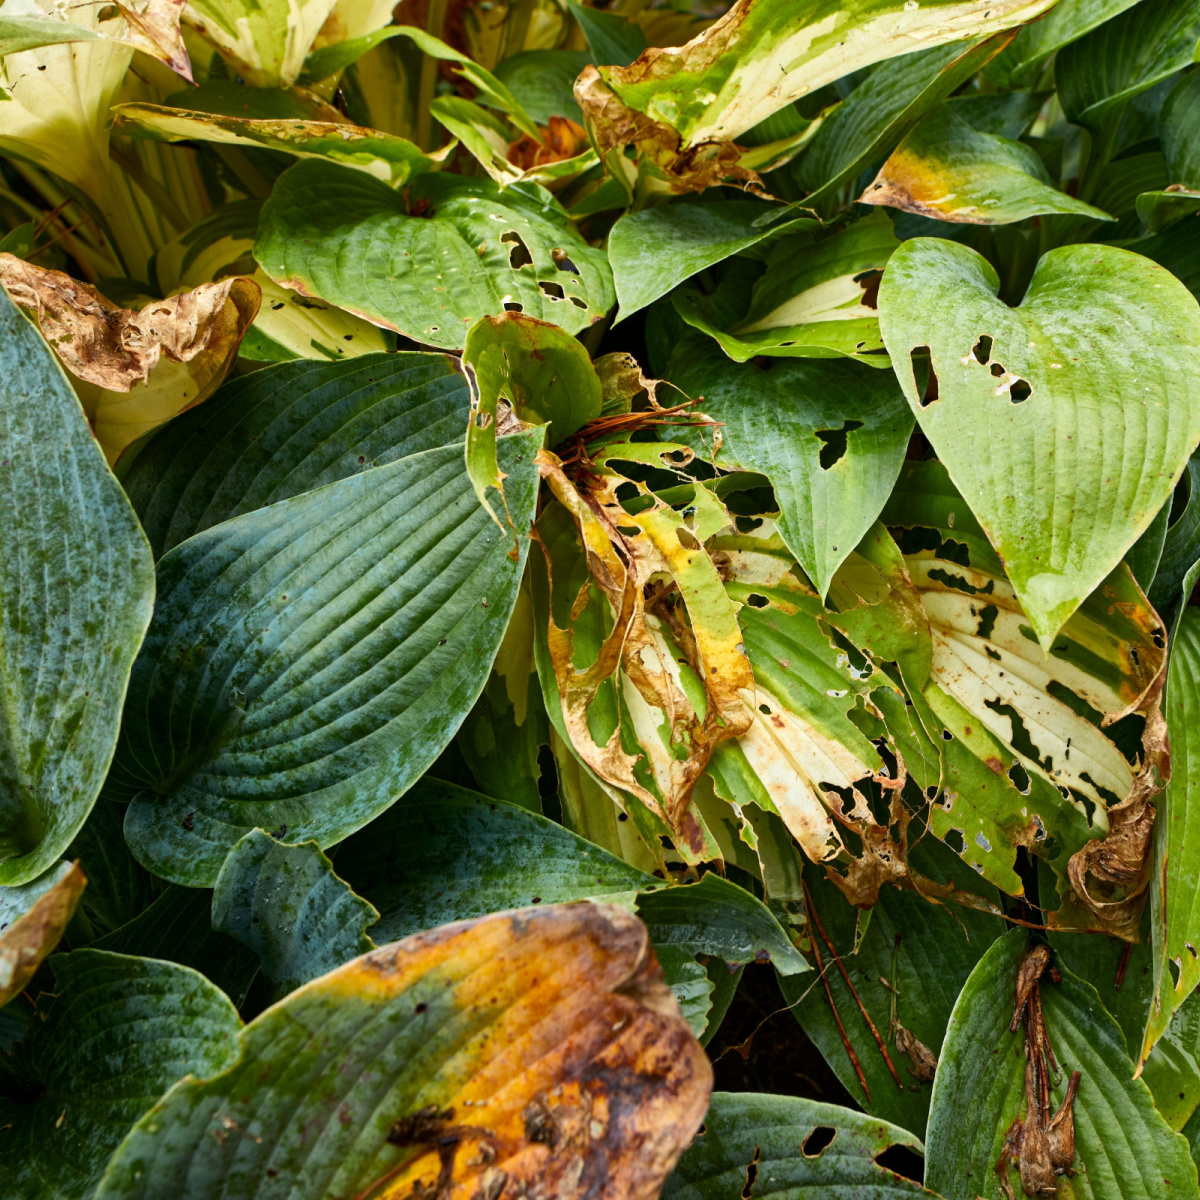 How To Revive Hosta Plants In The Summer - With Ease!